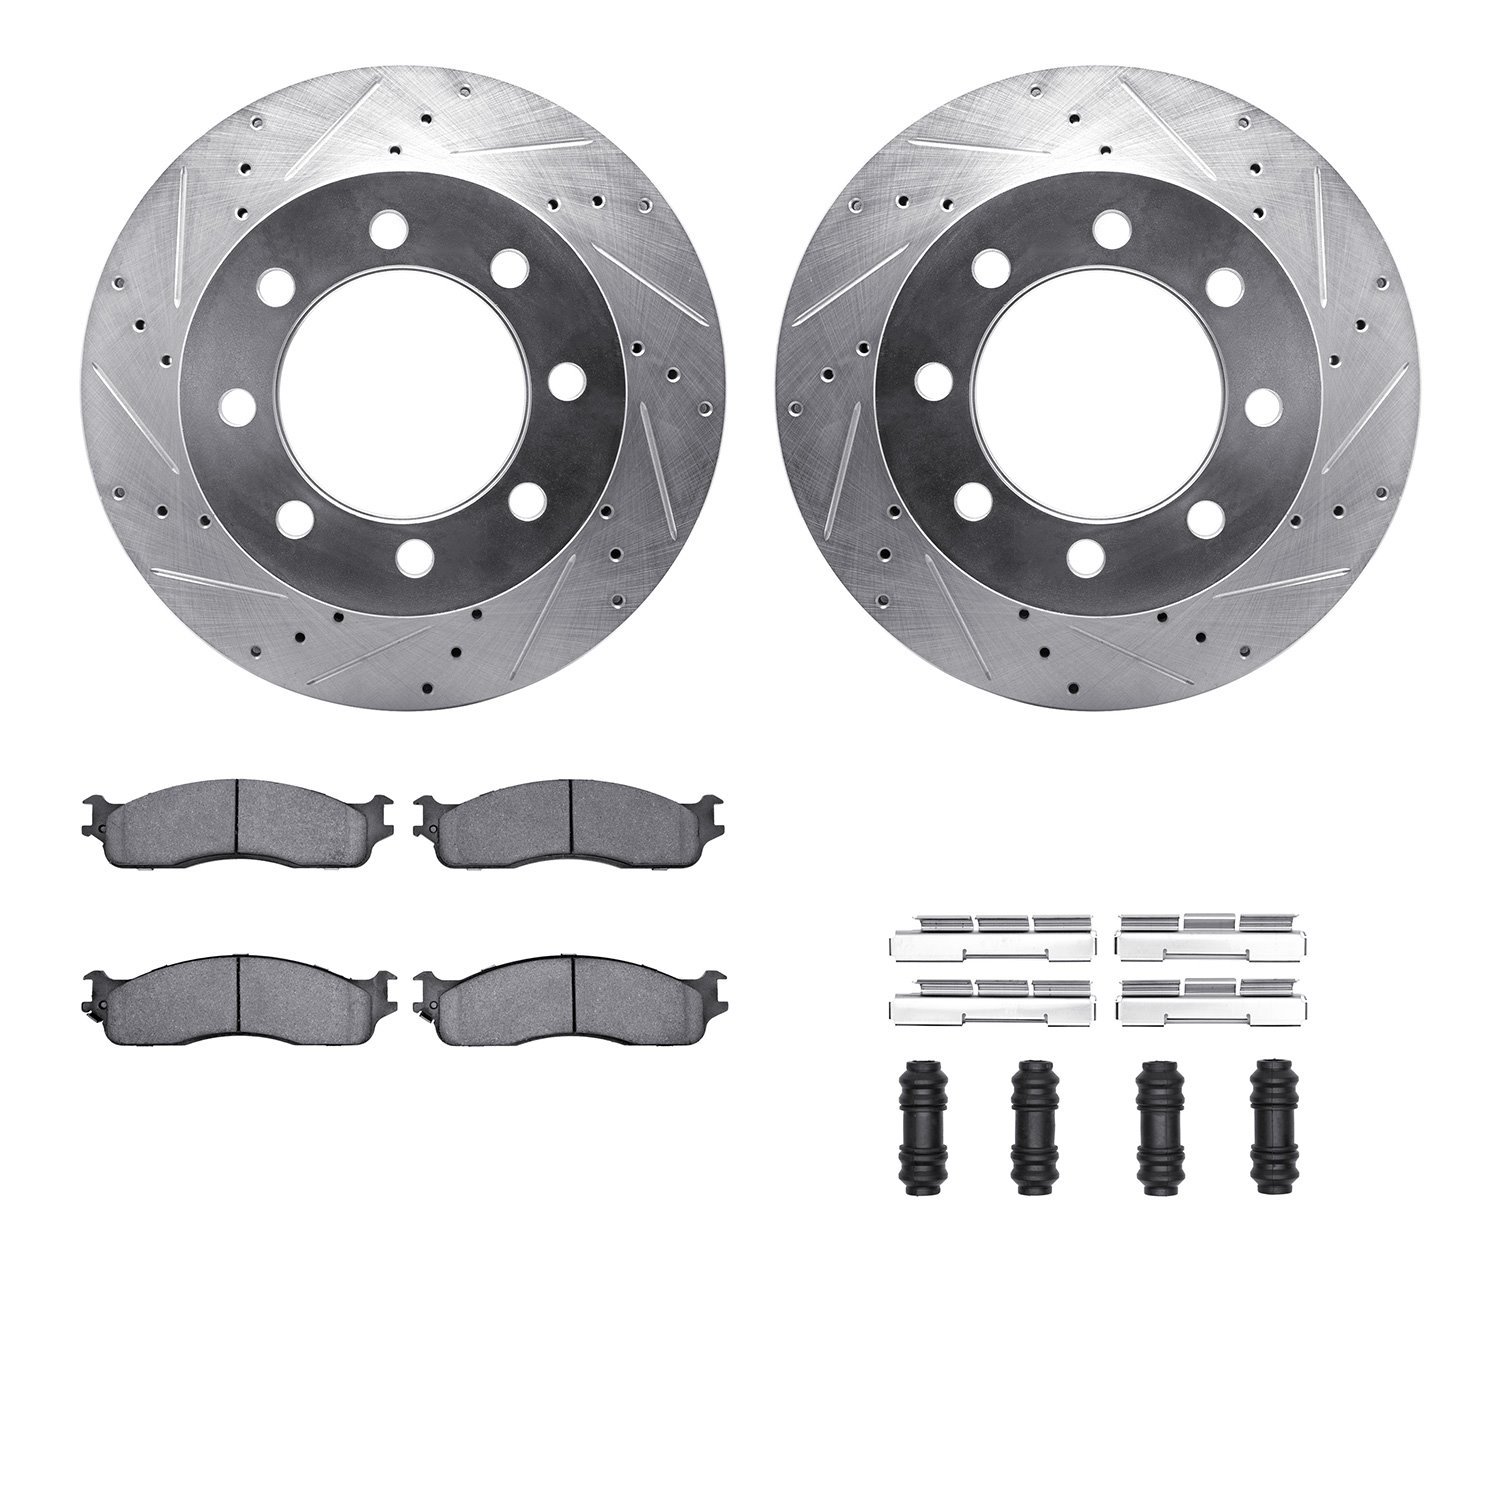 7412-40016 Drilled/Slotted Brake Rotors with Ultimate-Duty Brake Pads Kit & Hardware [Silver], 2003-2008 Mopar, Position: Front